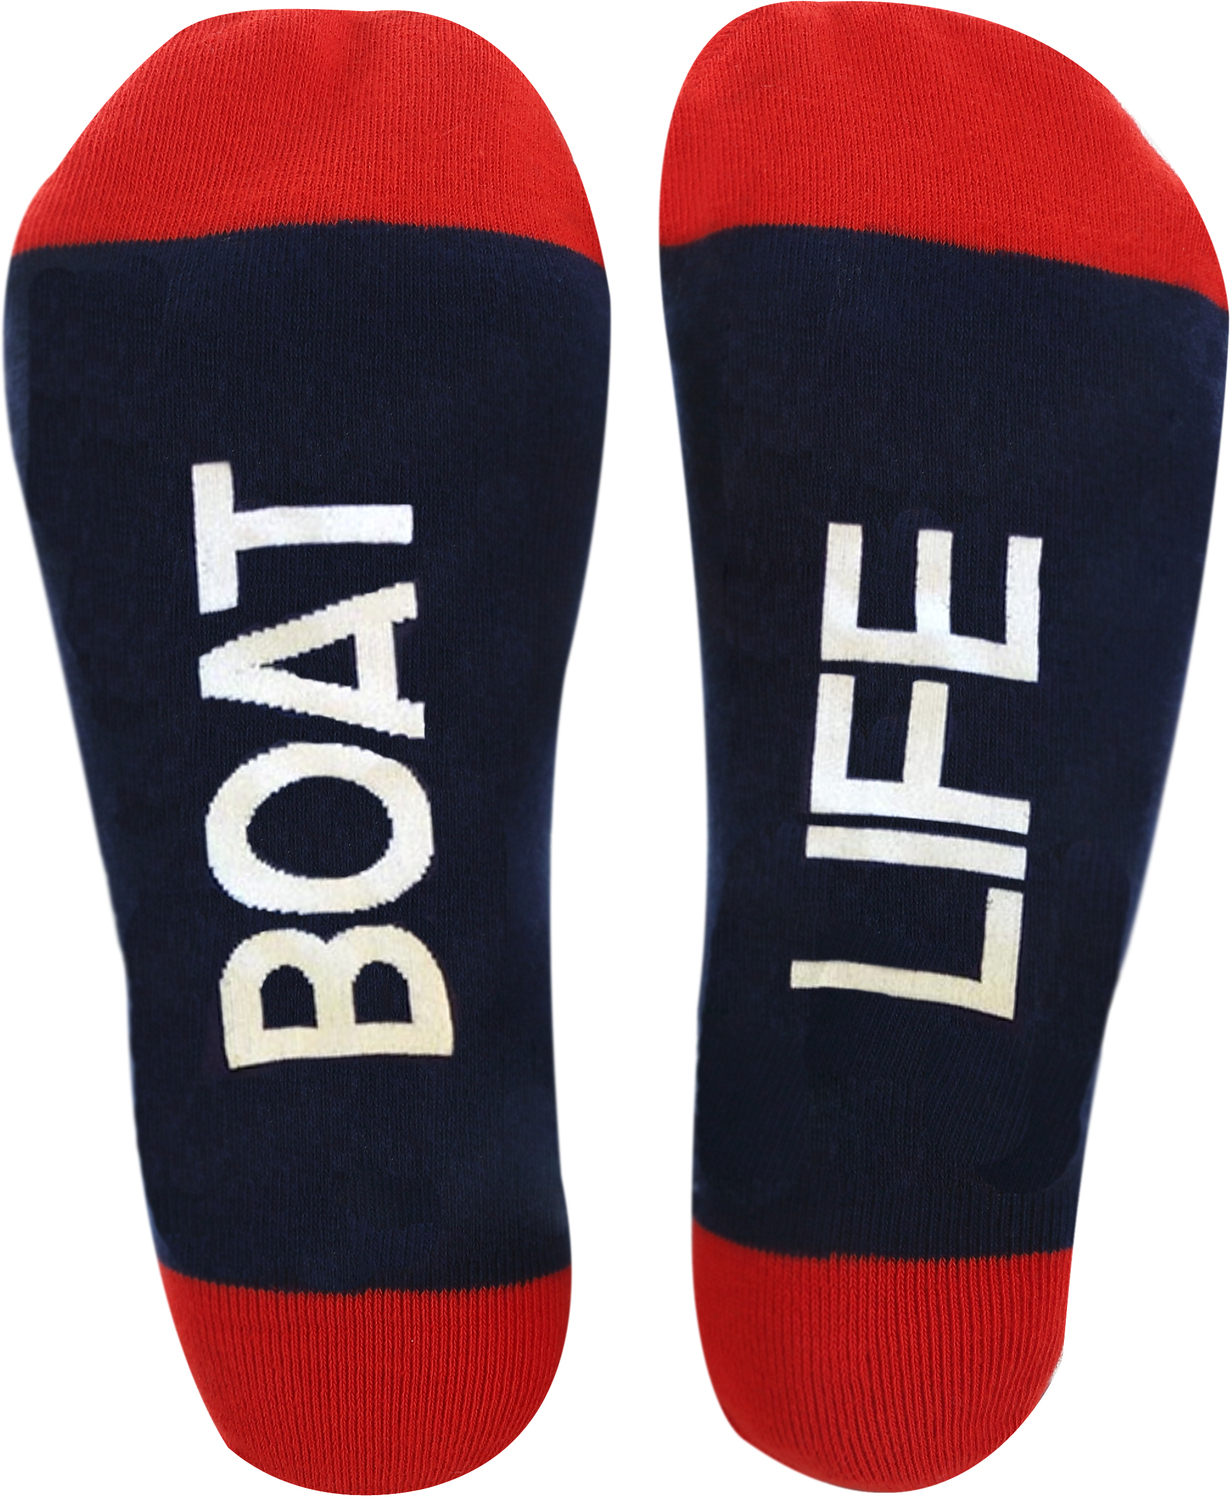 Boat Life by We People - Boat Life - M/L Unisex Socks